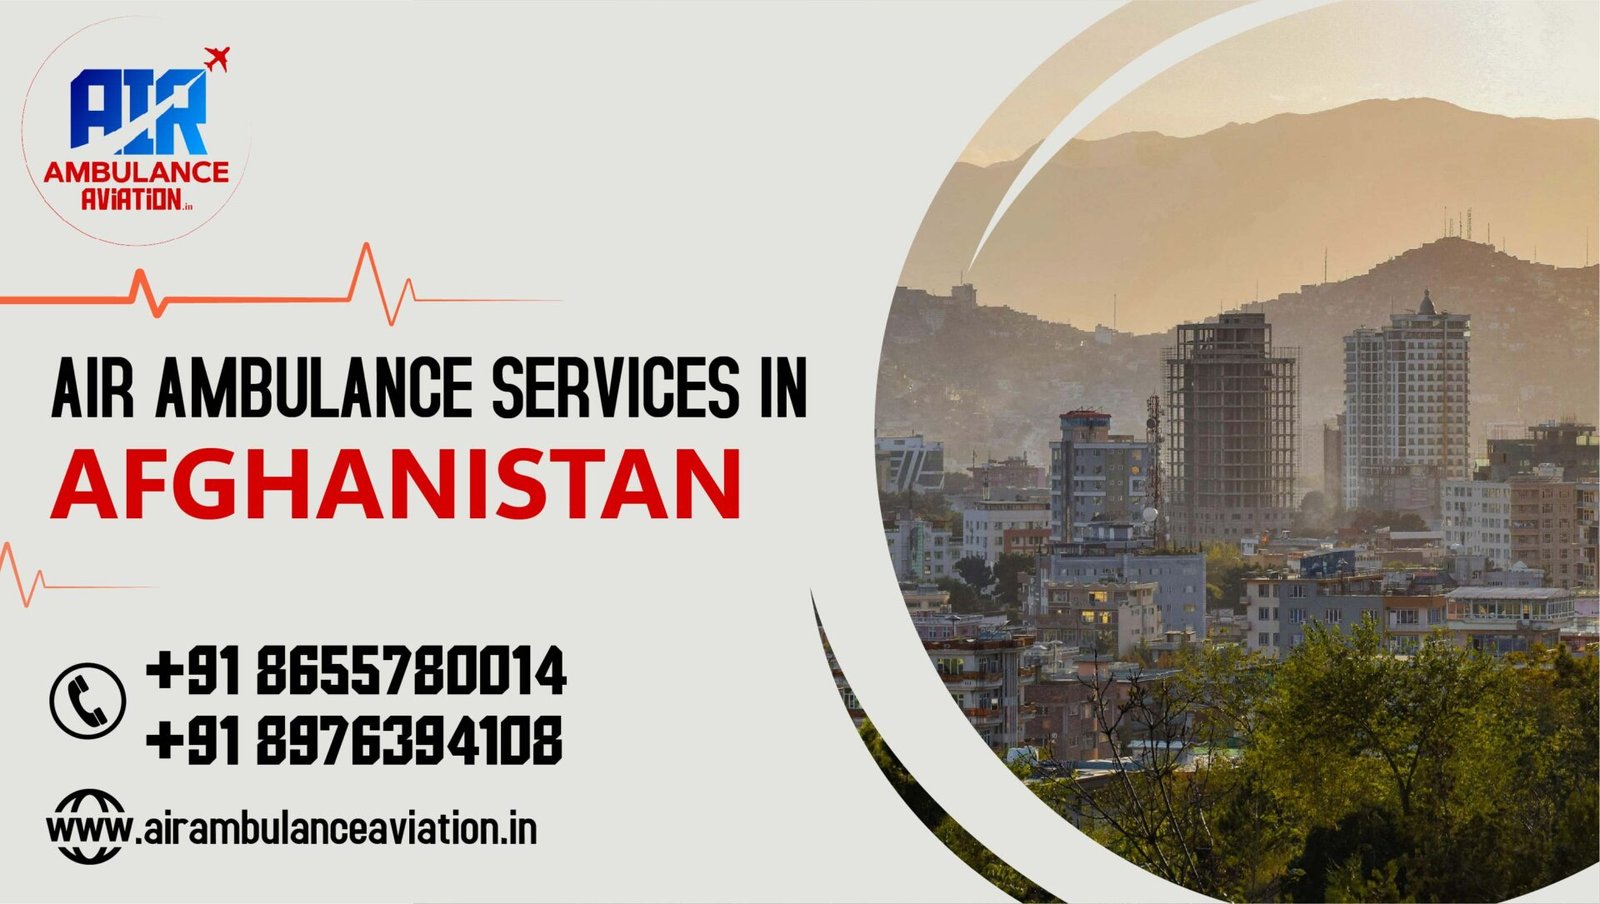 Air ambulance services in Afghanistan